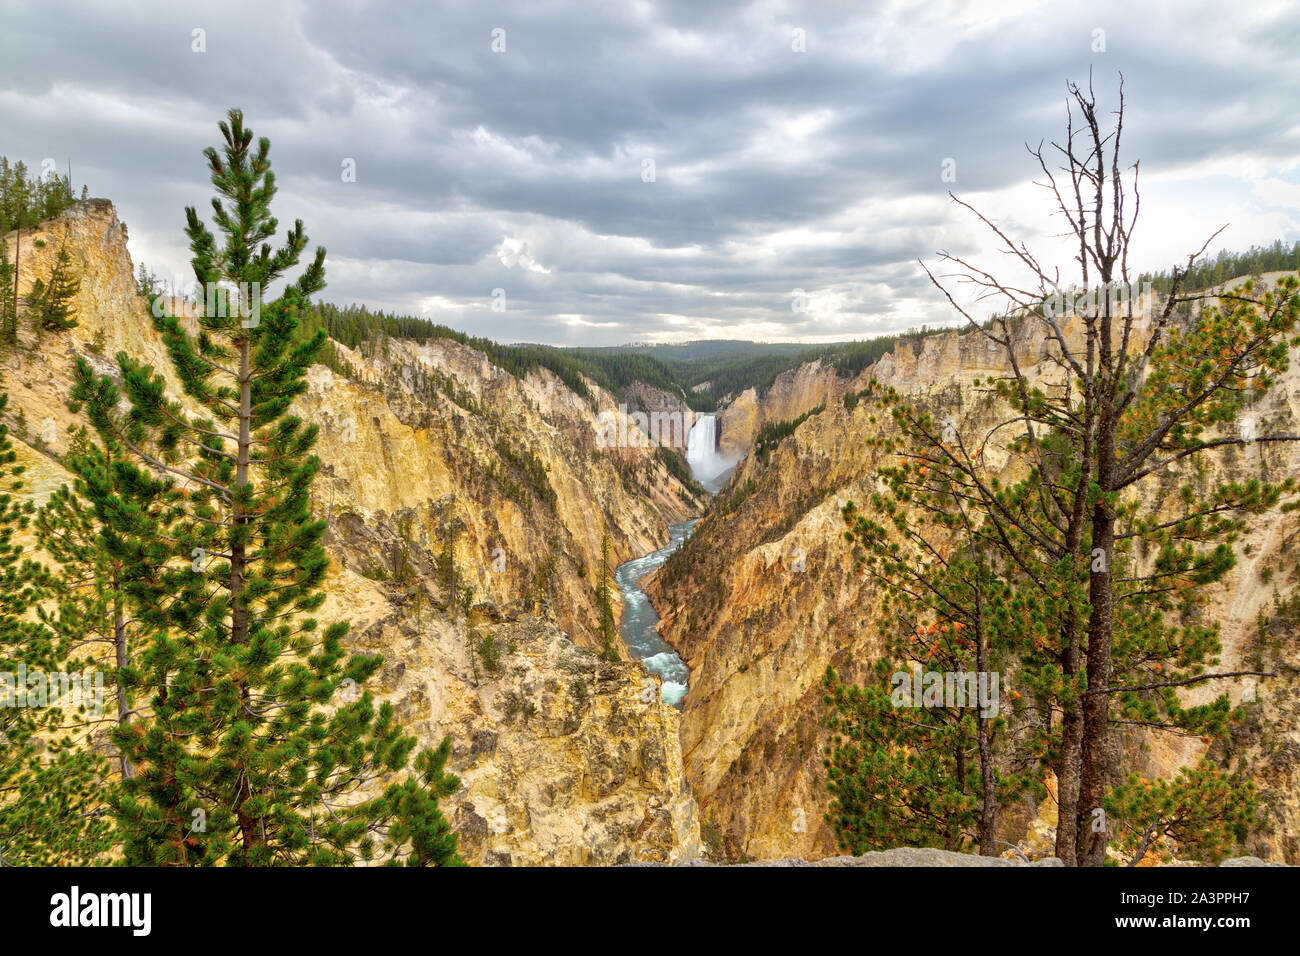 Lower Falls and Grand Canyon of the Yellowstone from Artist Point. The canyon is 20 miles long, over 1,000 feet deep and up to 4,000 feet wide. Stock Photo